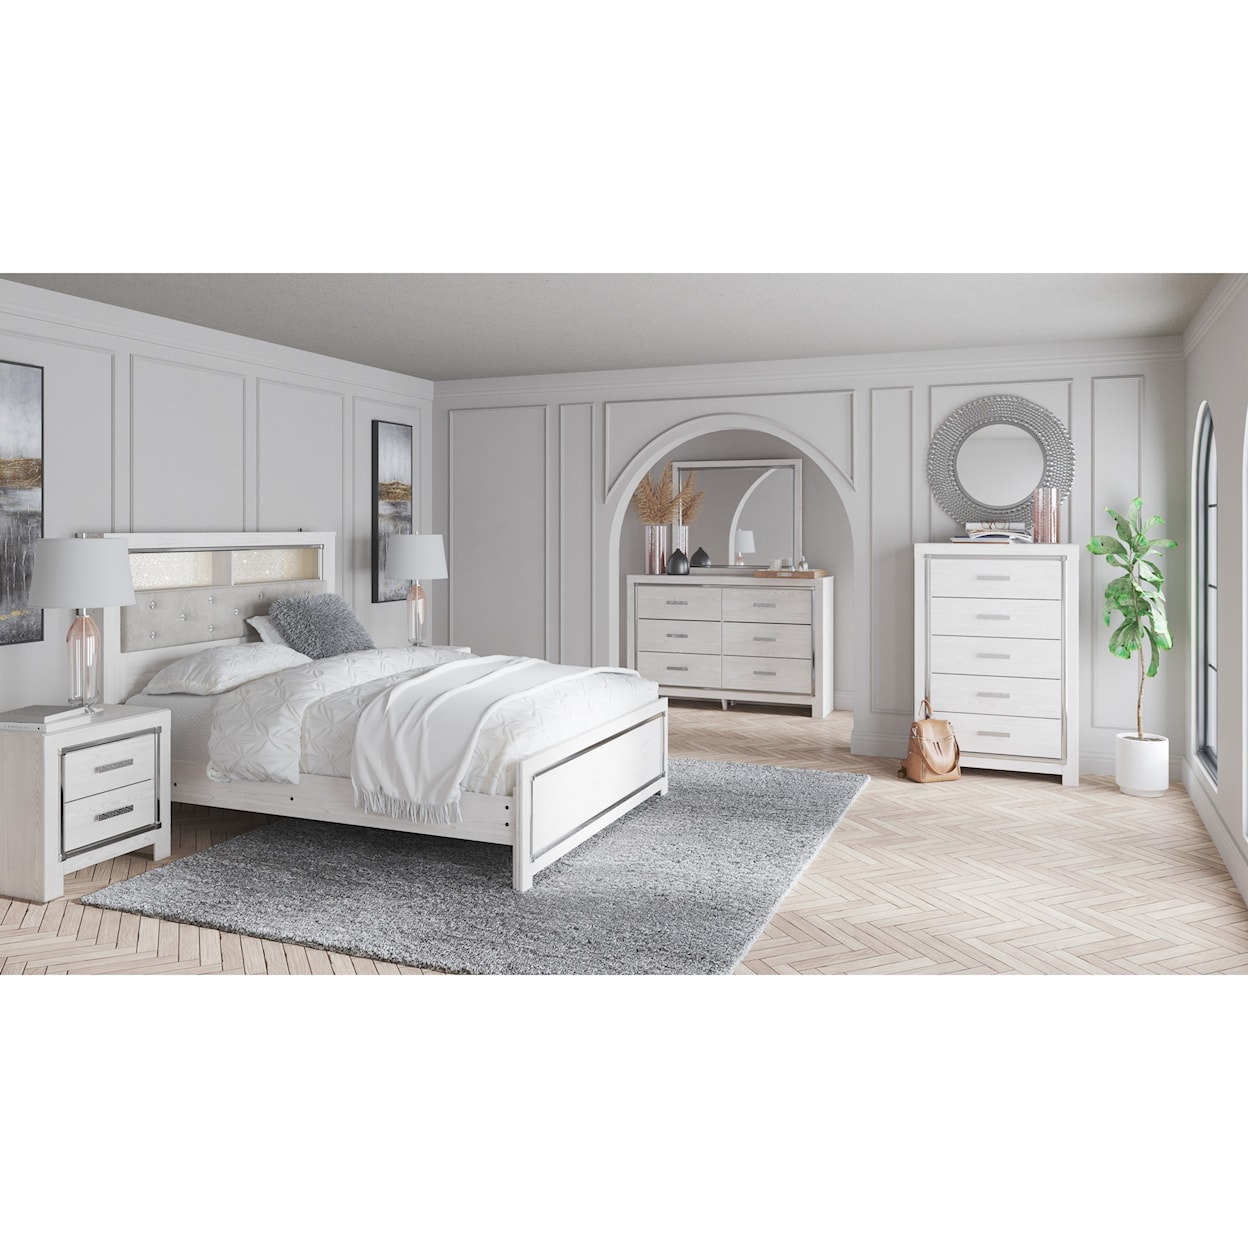 Ashley Signature Design Altyra Twin Bedroom Group